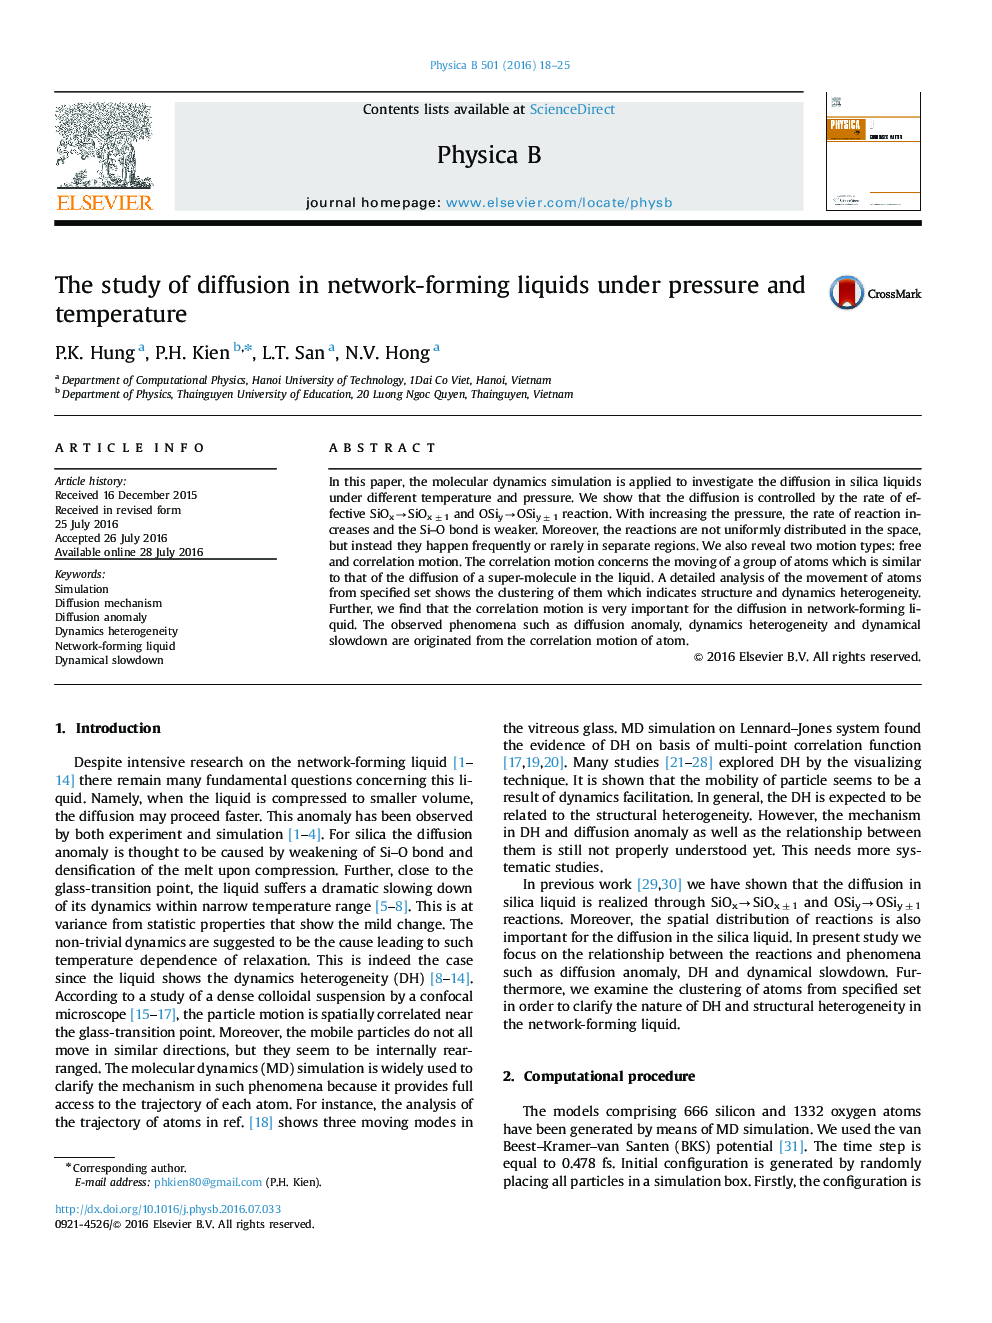 The study of diffusion in network-forming liquids under pressure and temperature